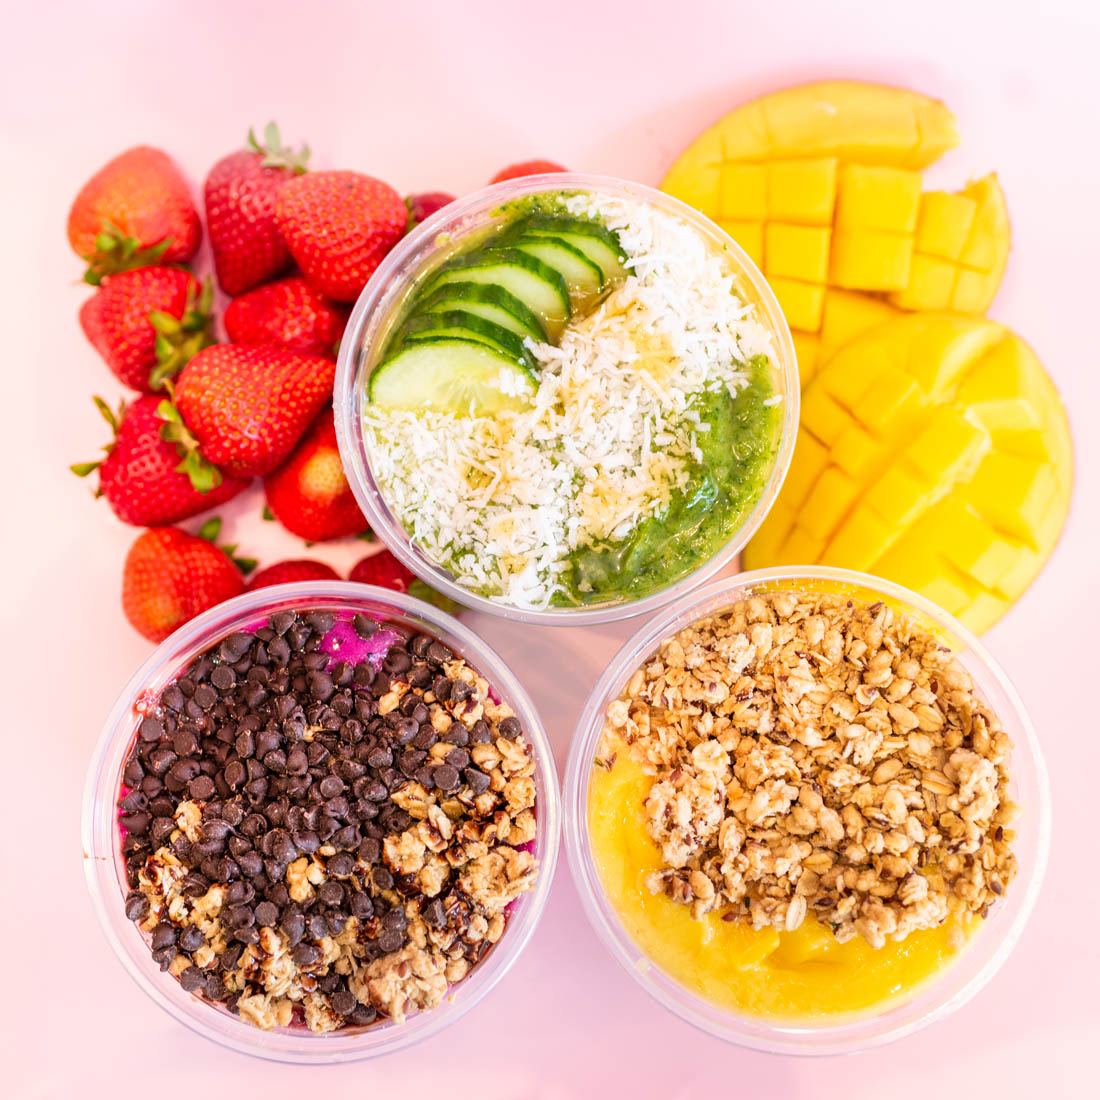 Rush Bowls smoothie bowls nutrition info in Fishers, IN.